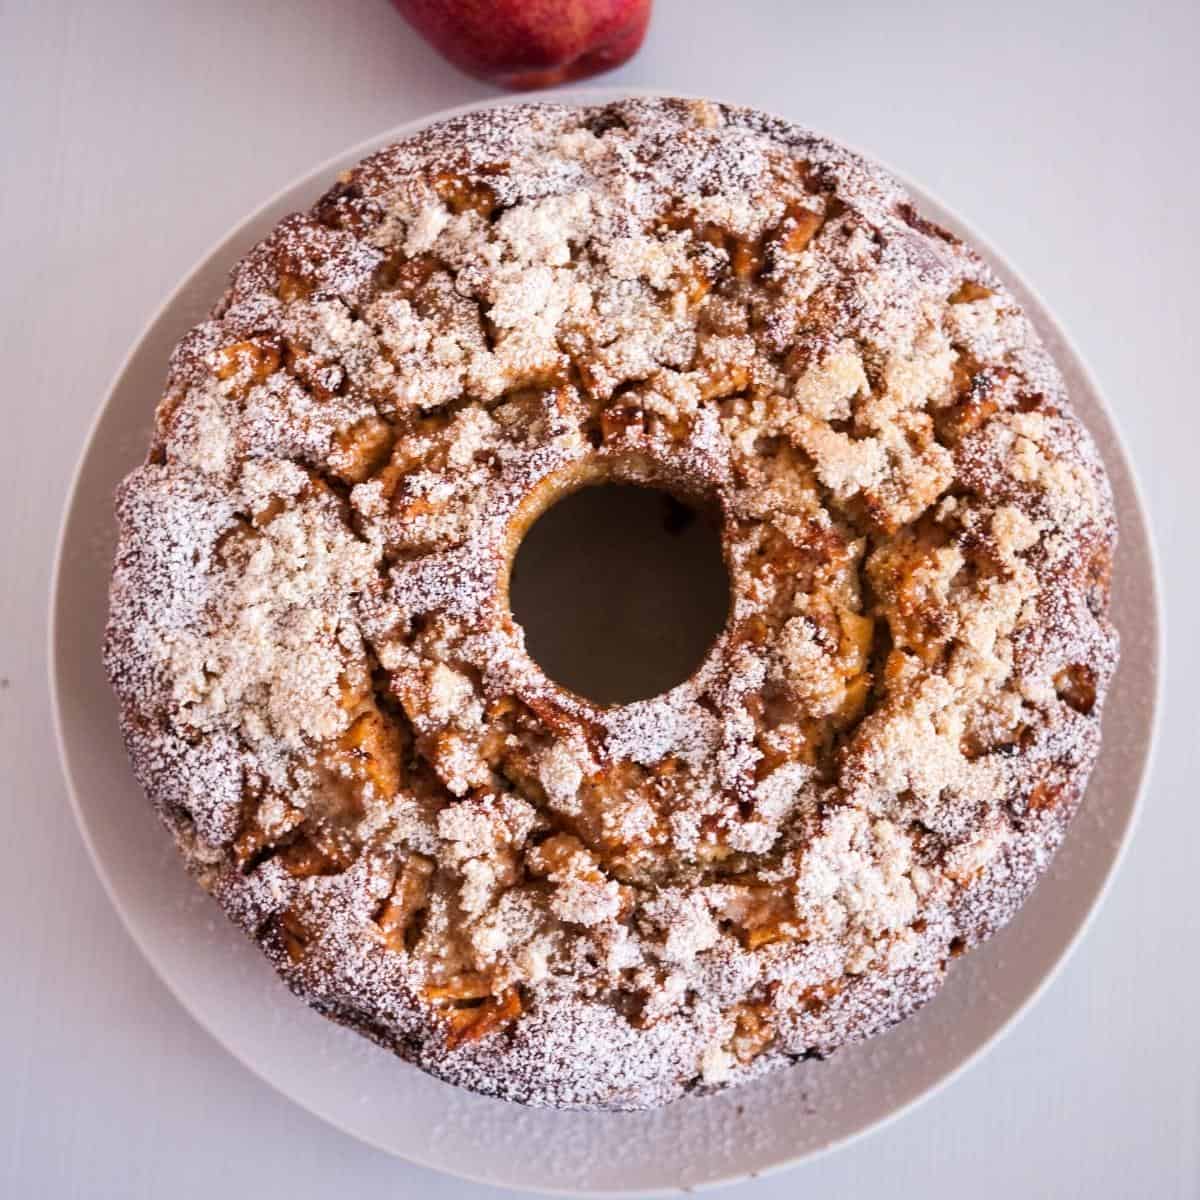 Top view of the apple cake.